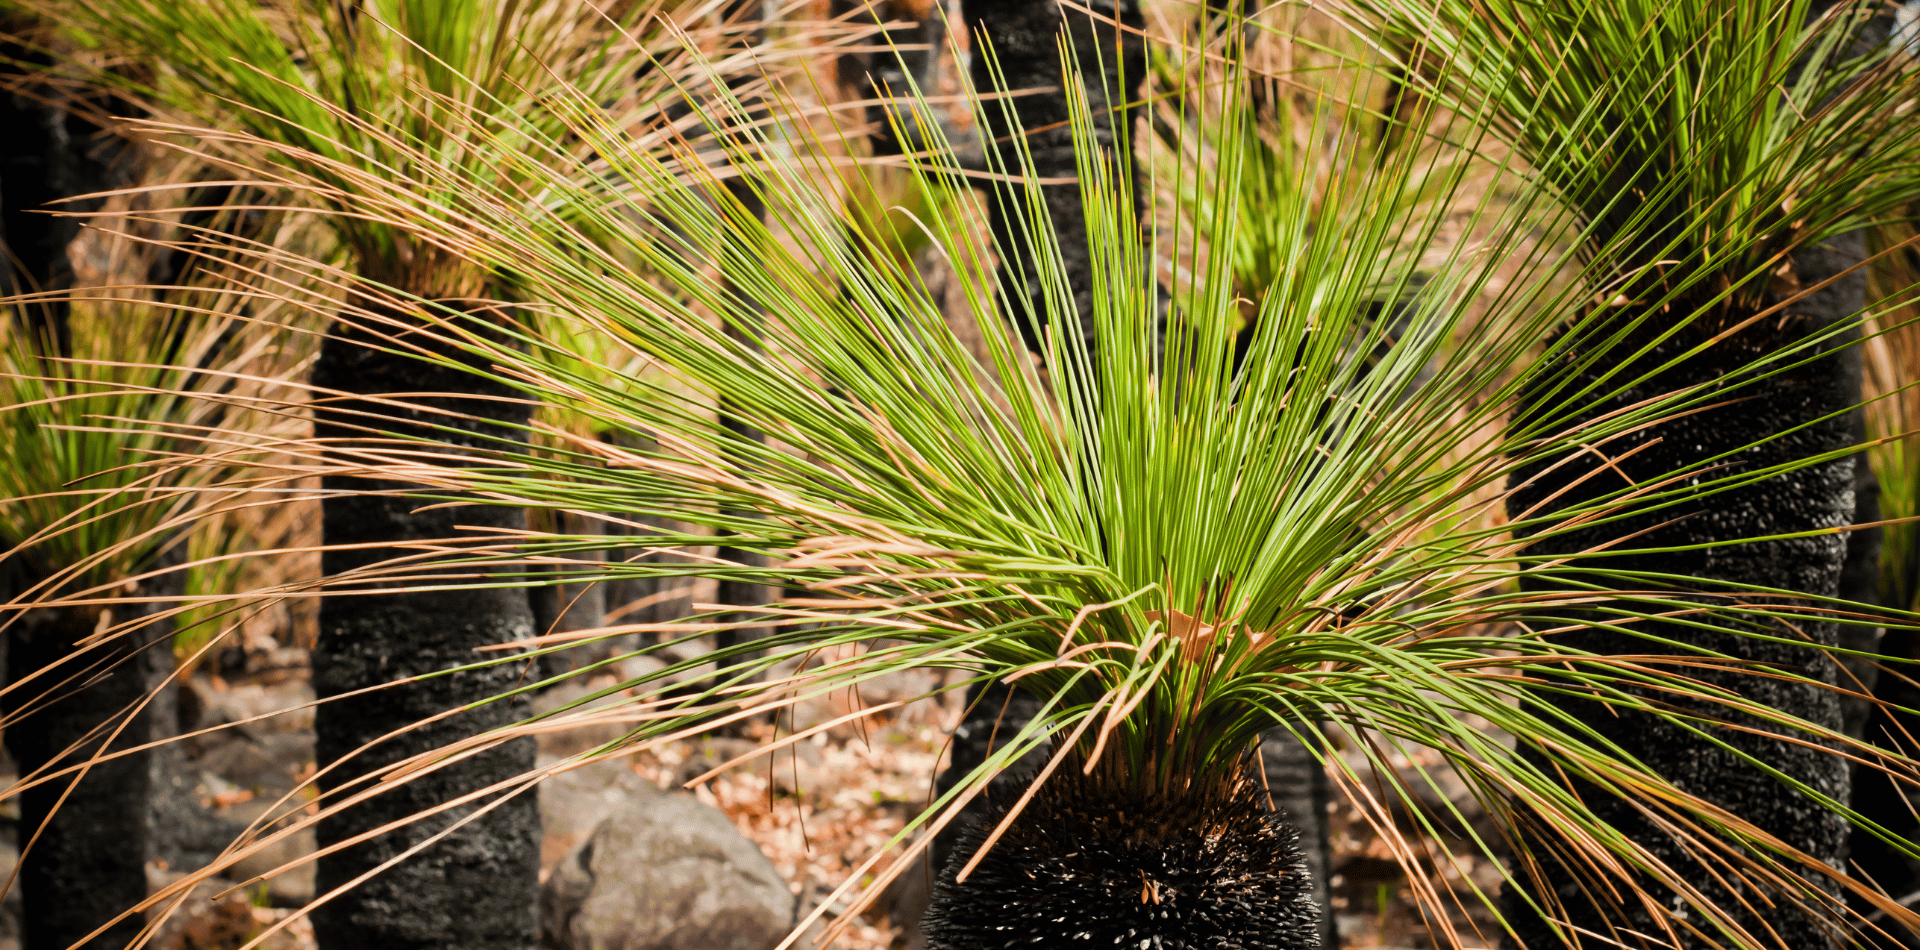 Australian Grass tree in it's natural environment